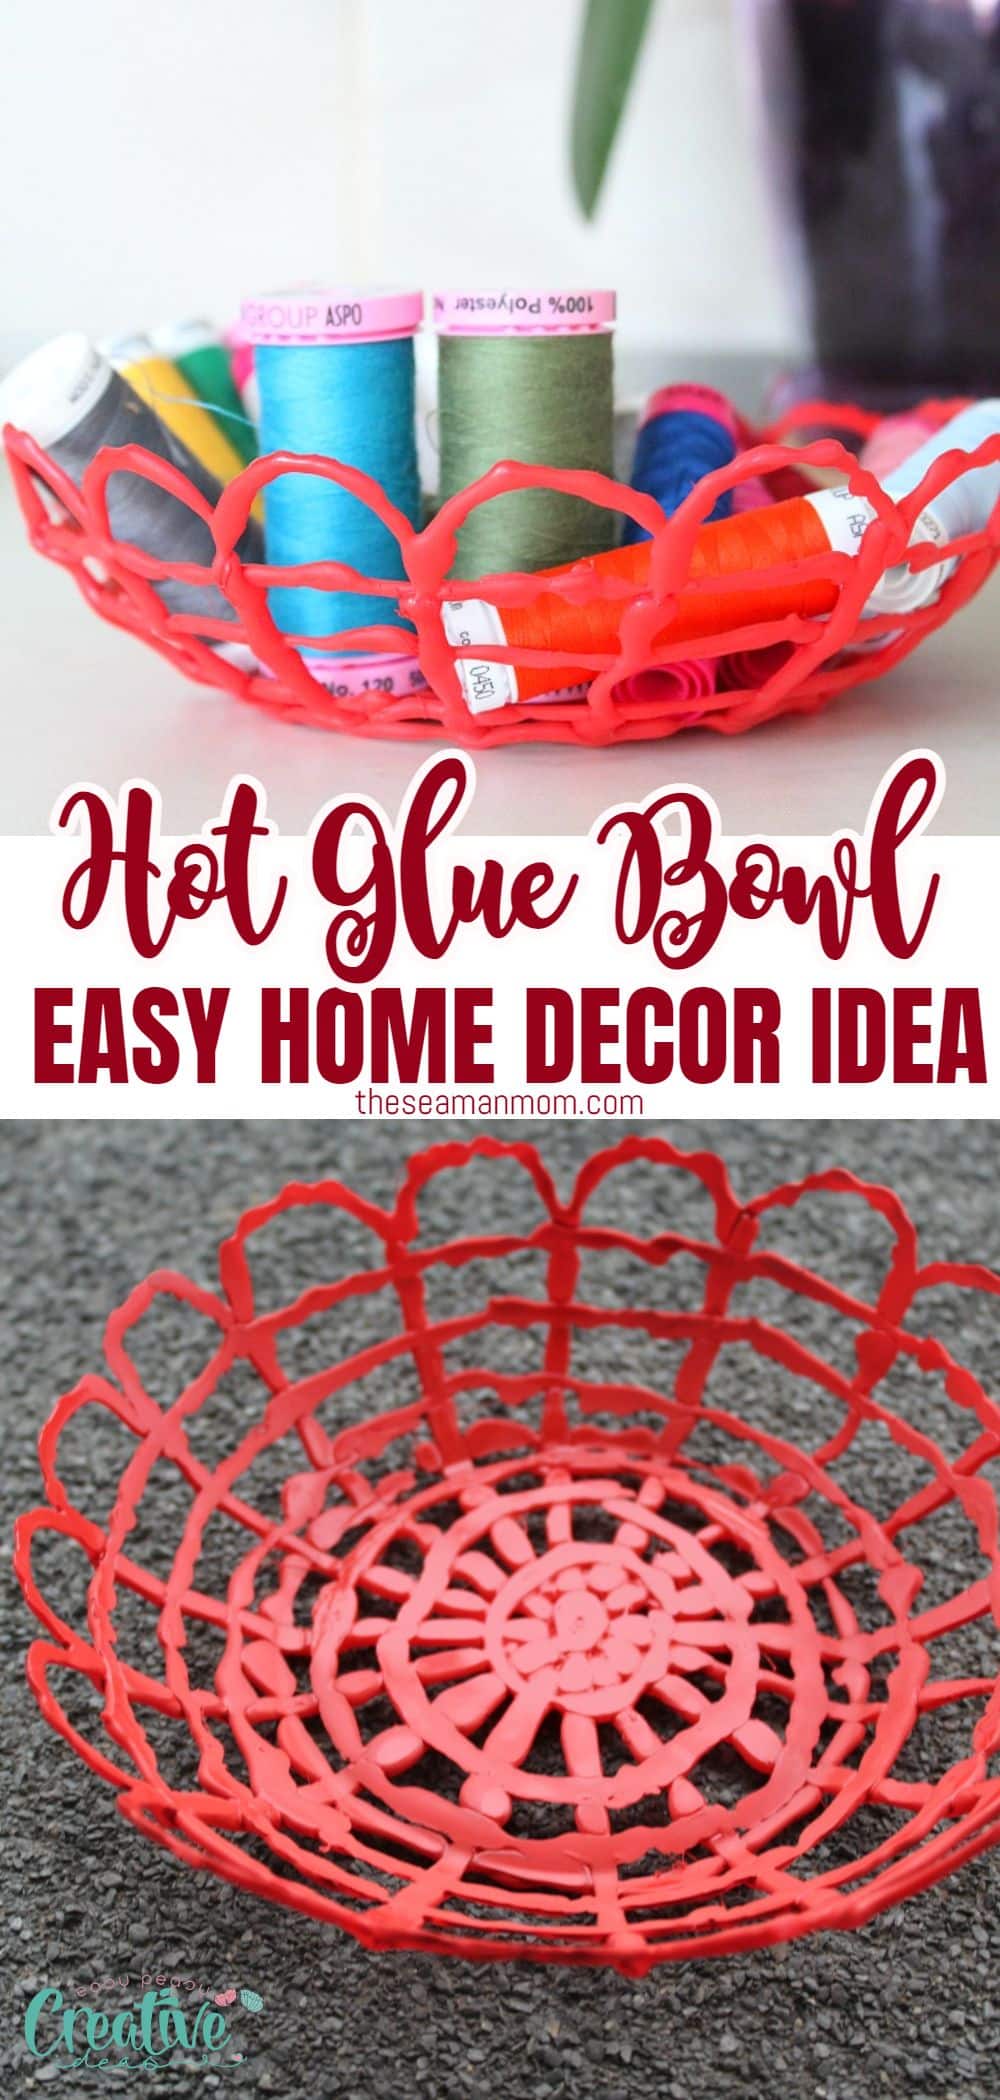 If you have some spare time or need a little bowl for storing craft or sewing supplies, you can make a neat and super cool hot glue bowl with this project. via @petroneagu